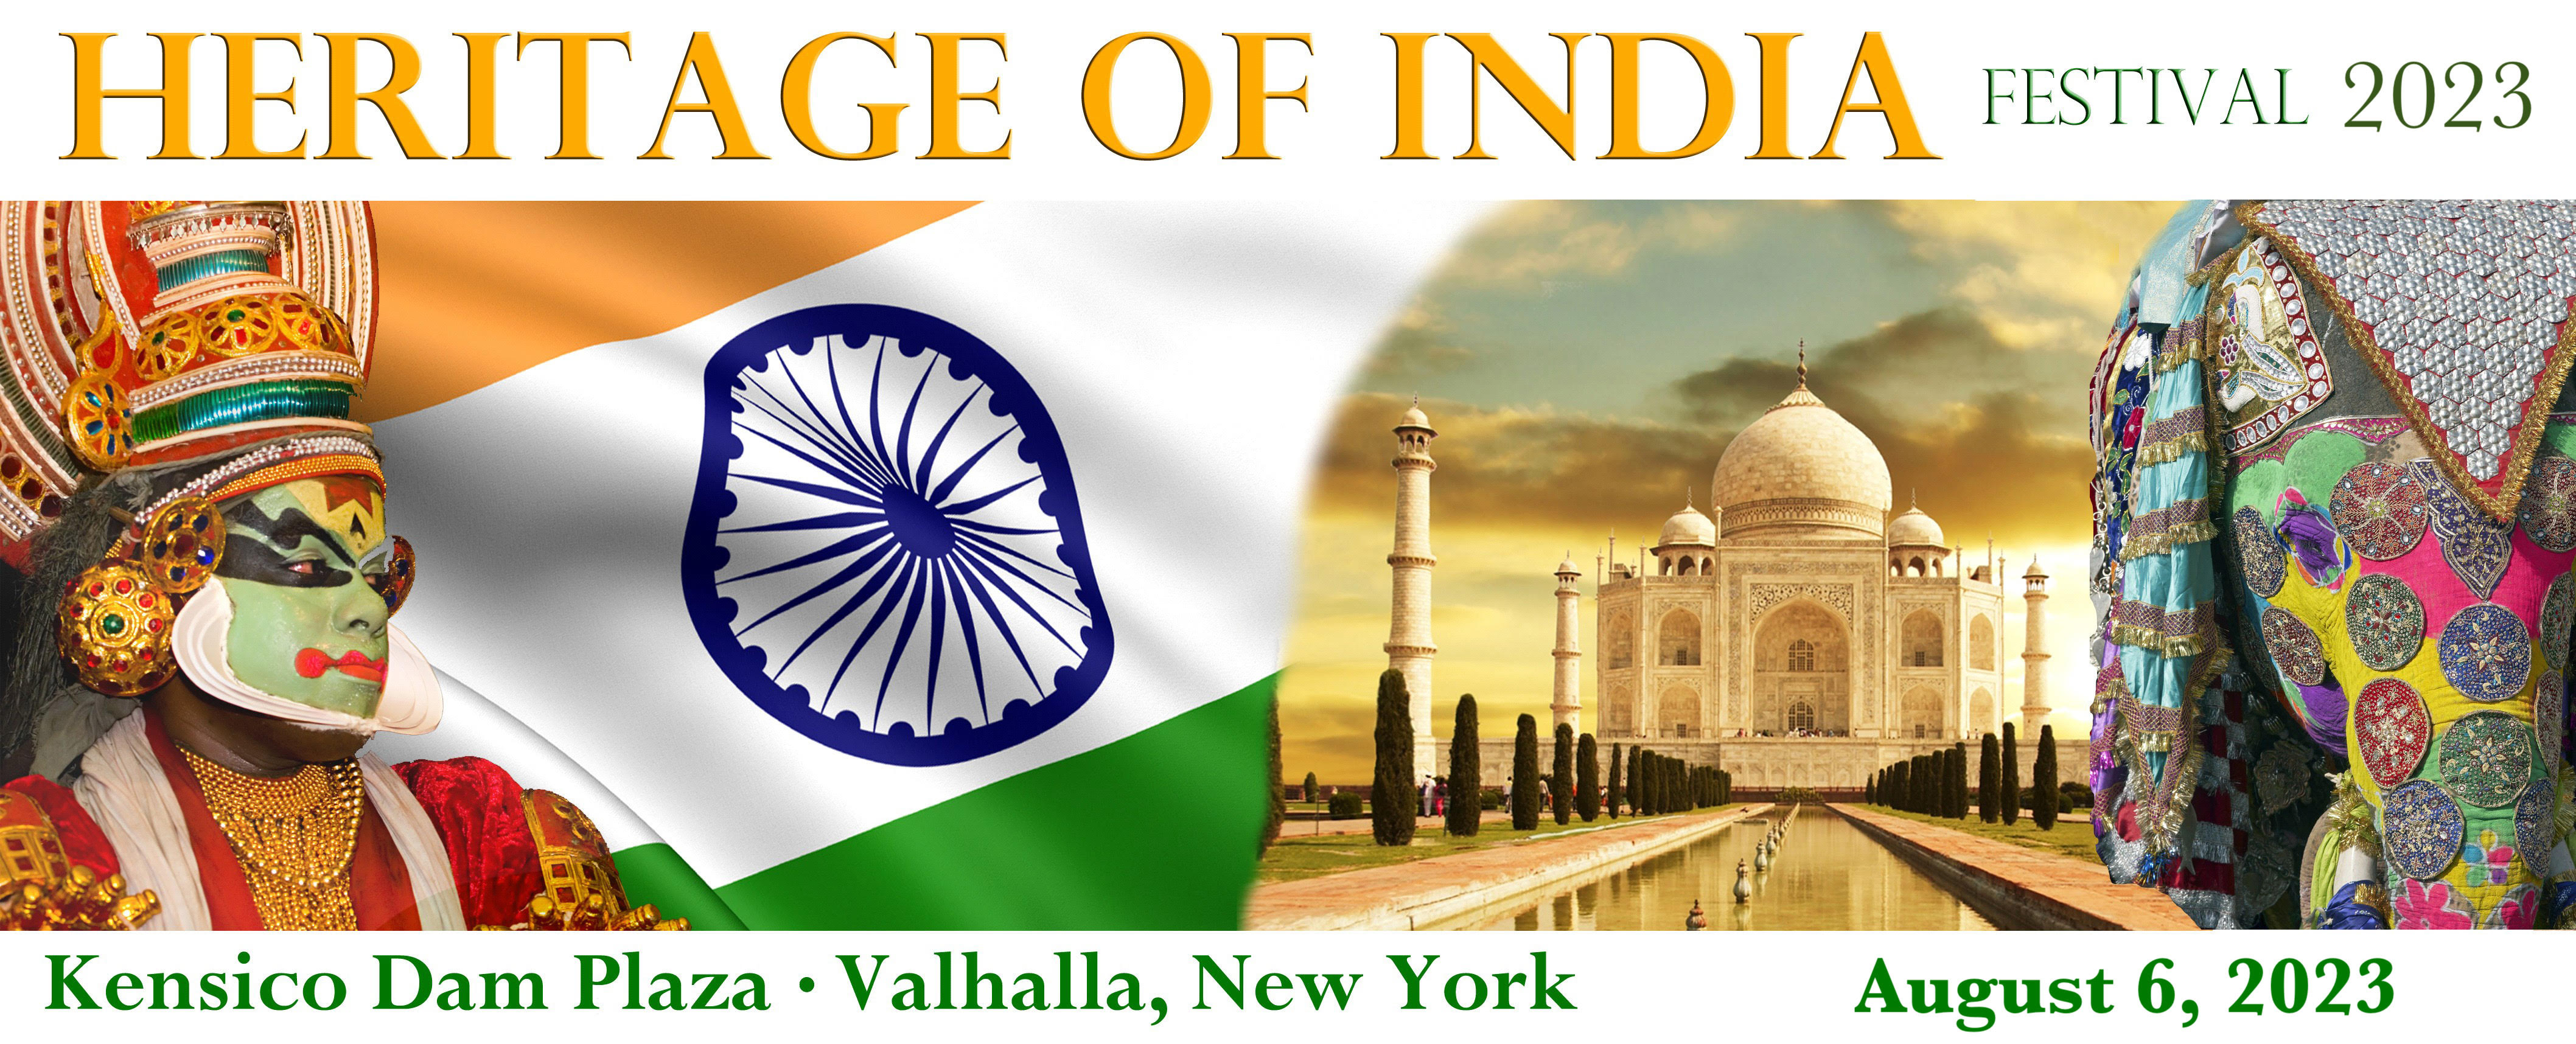 Westchester, NY to host ‘Heritage of India’ Festival